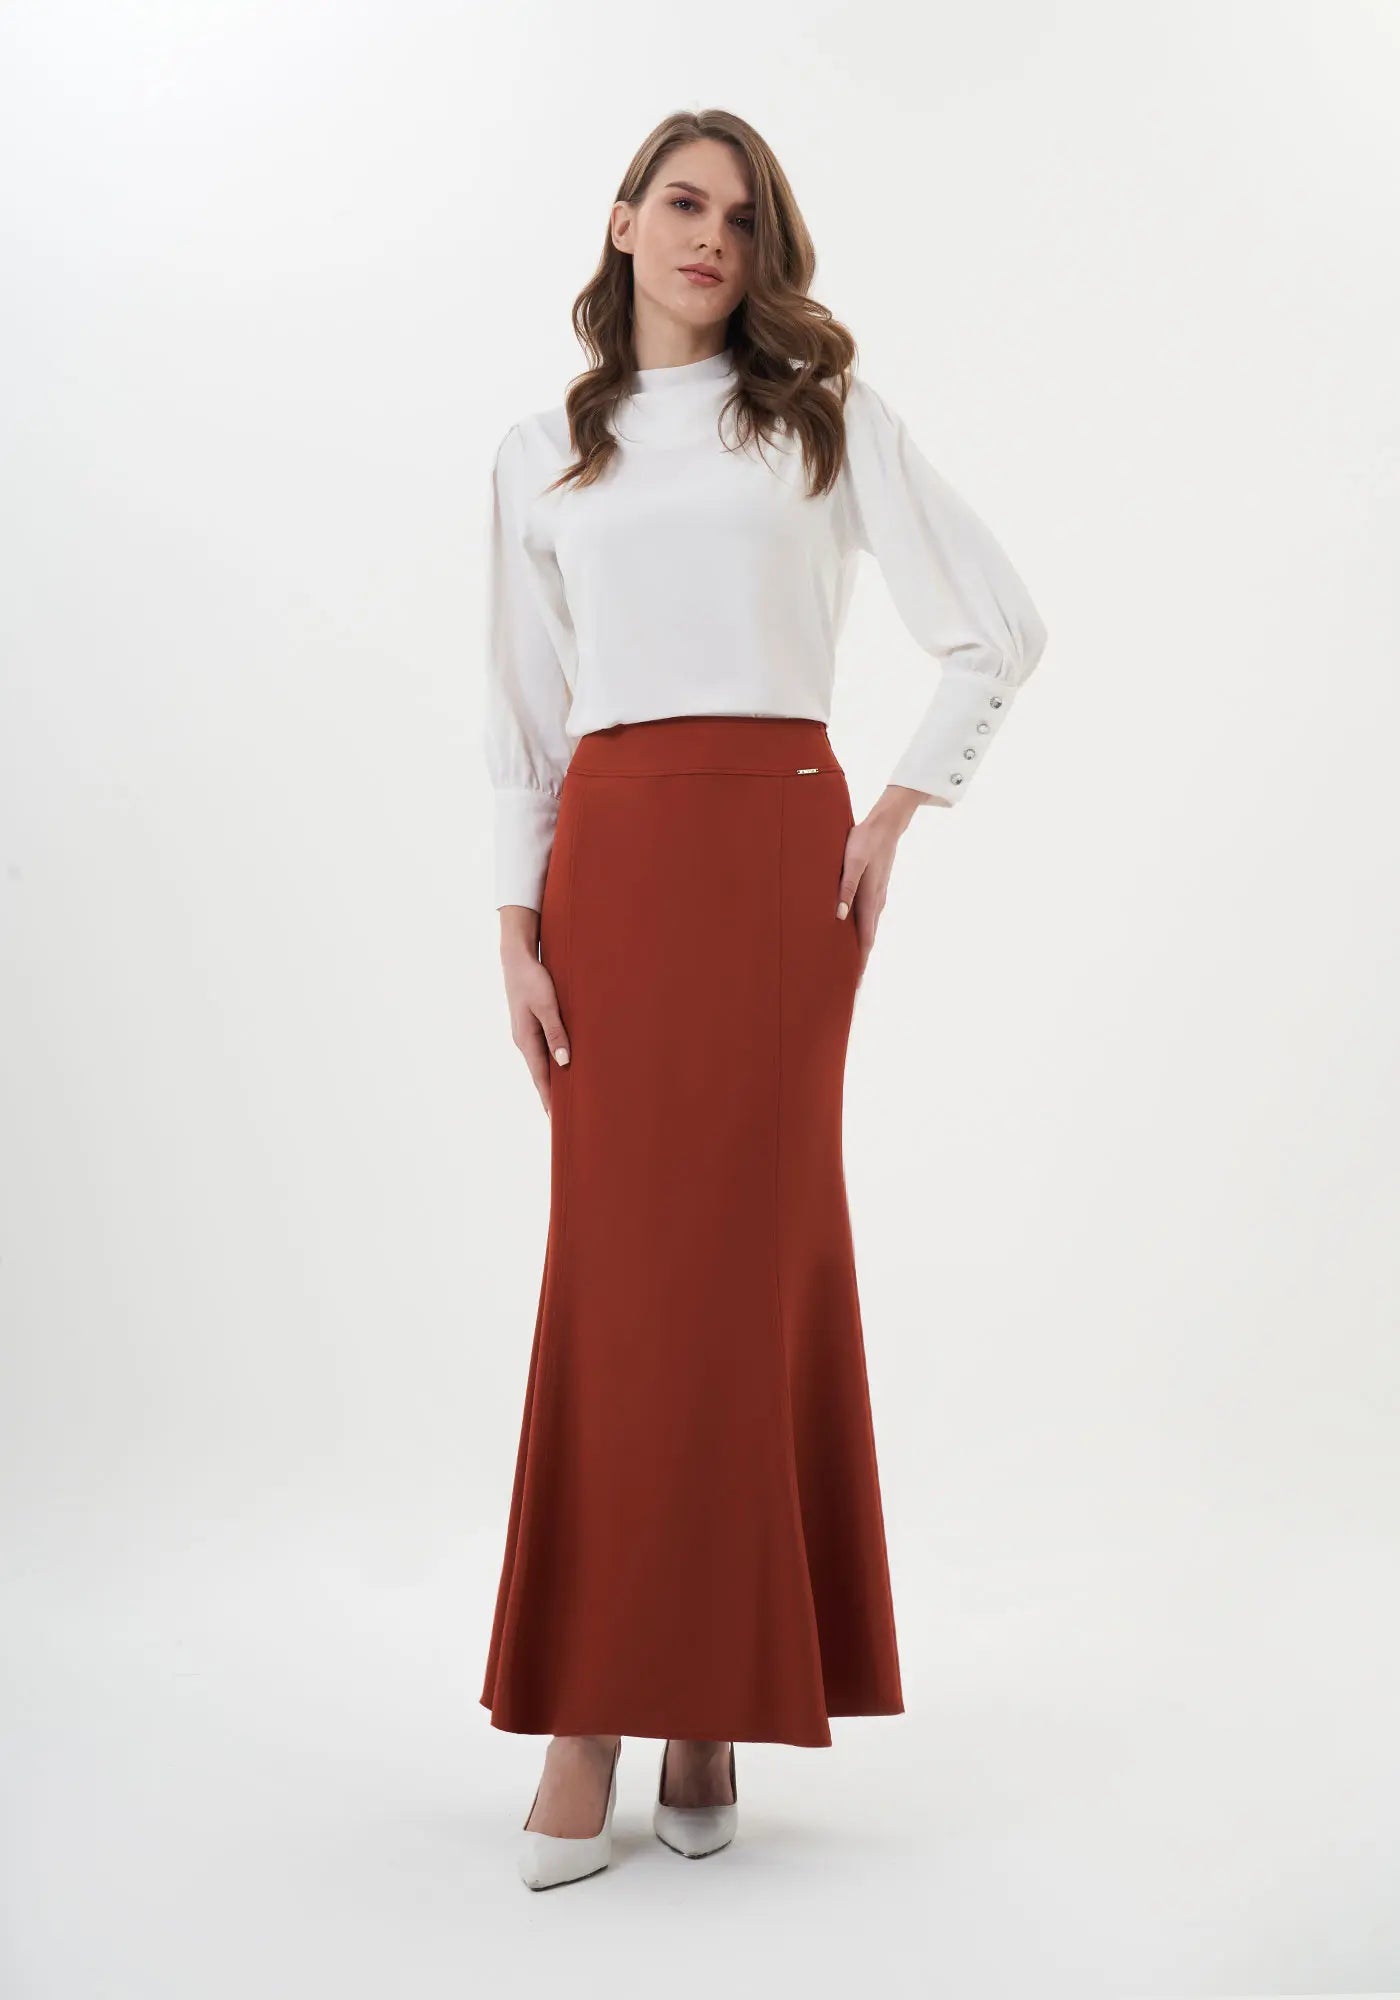 Copy of Fishtail Maxi Skirt (Available in Plus Size 4-20) | Solid Bodycon Mermaid Skirt, Elegant High Waist Maxi Skirt G-Line